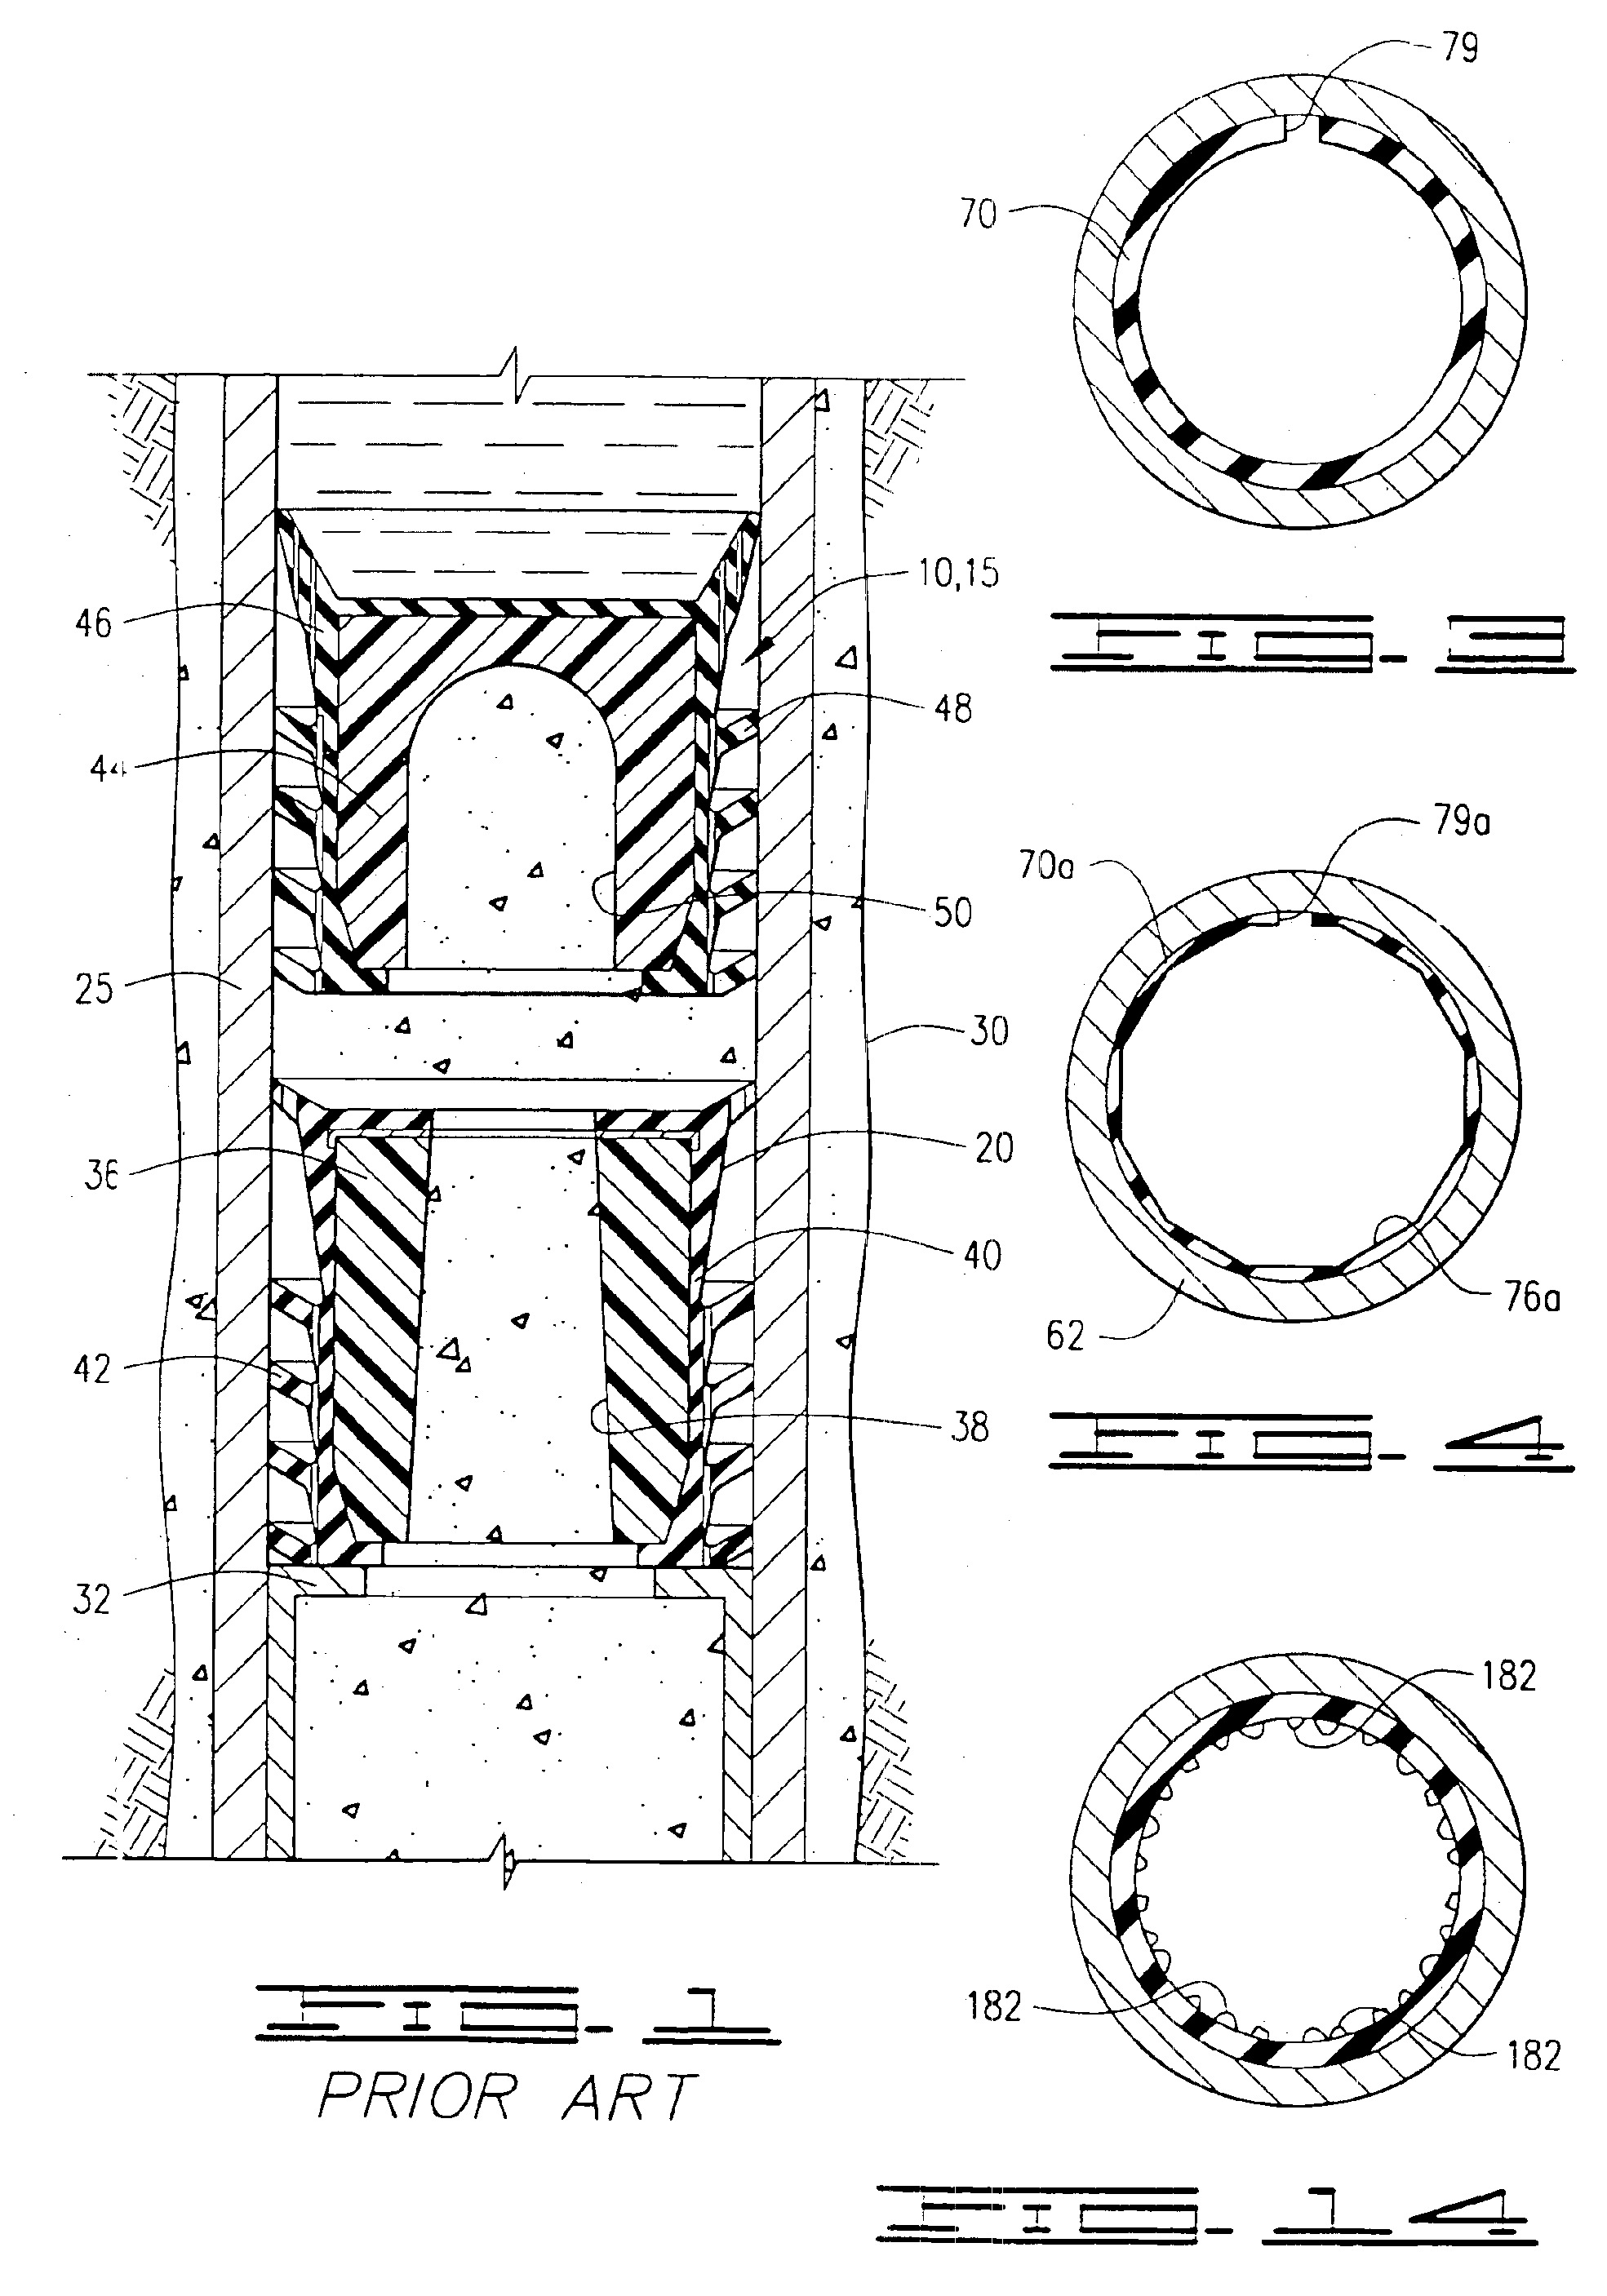 Anti-rotation method and apparatus for limiting rotation of cementing plugs